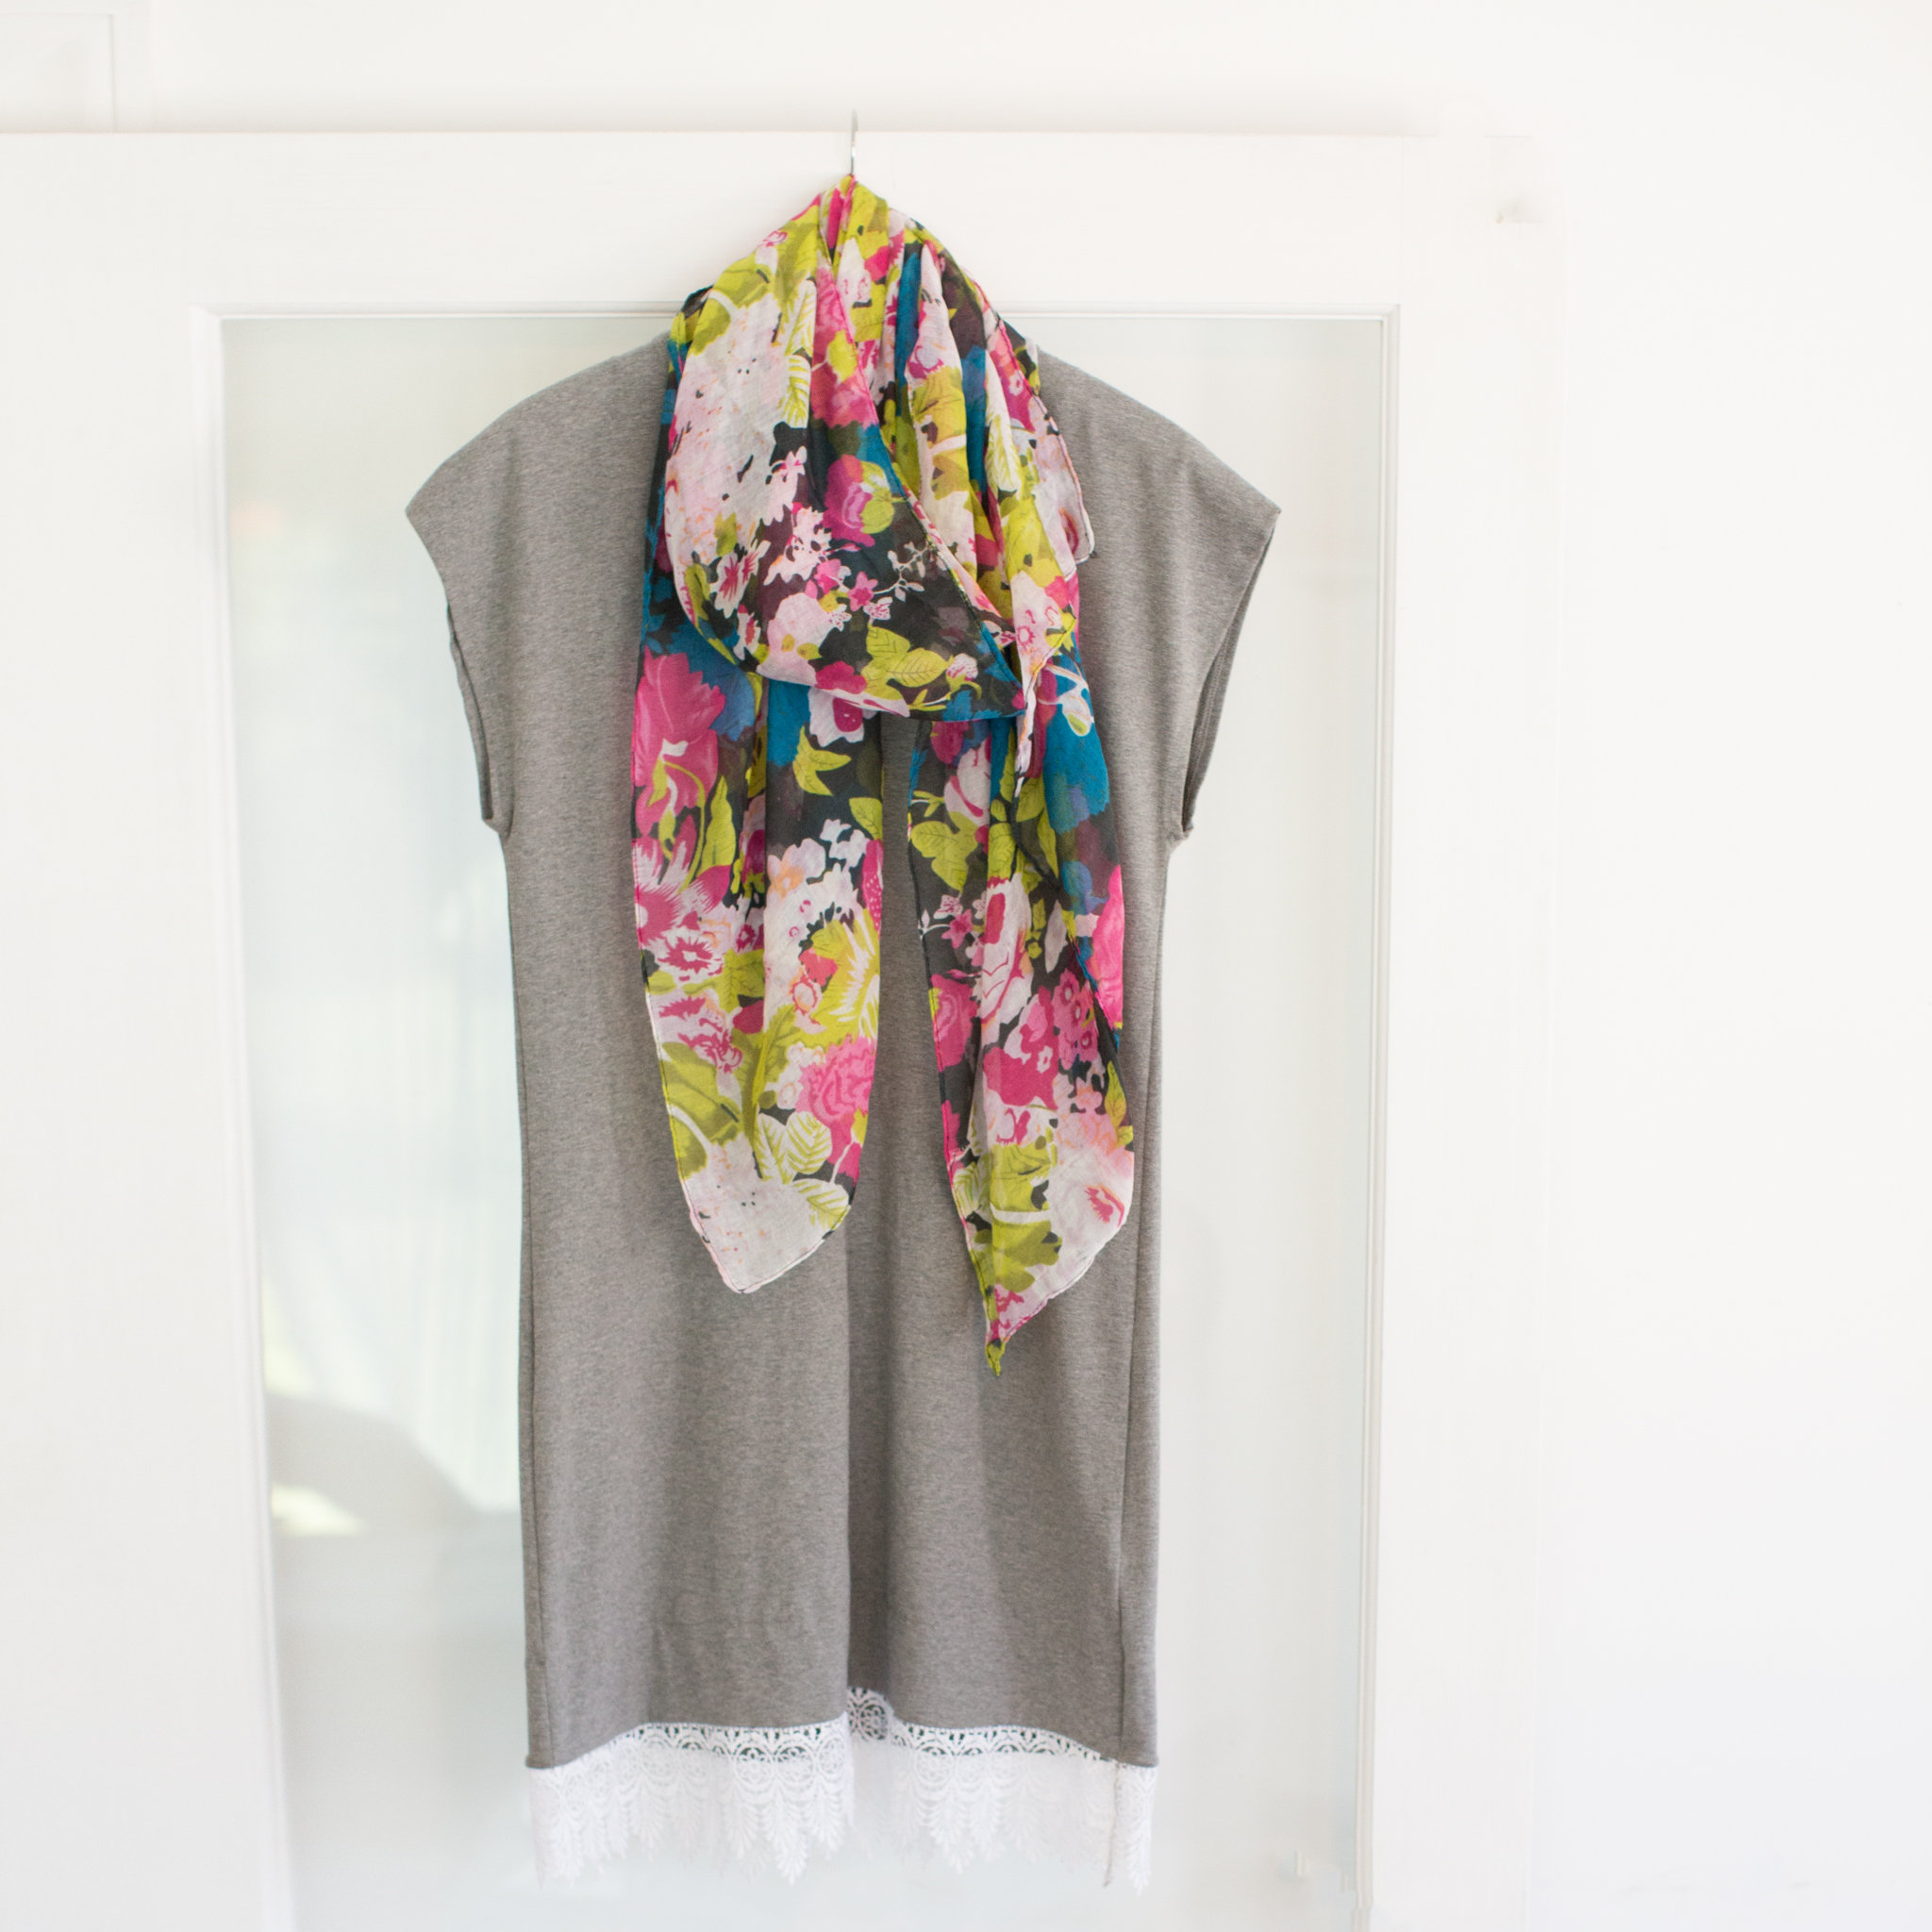 View More: http://em-grey.pass.us/molly-and-carly-giveaway-the-flourish-market